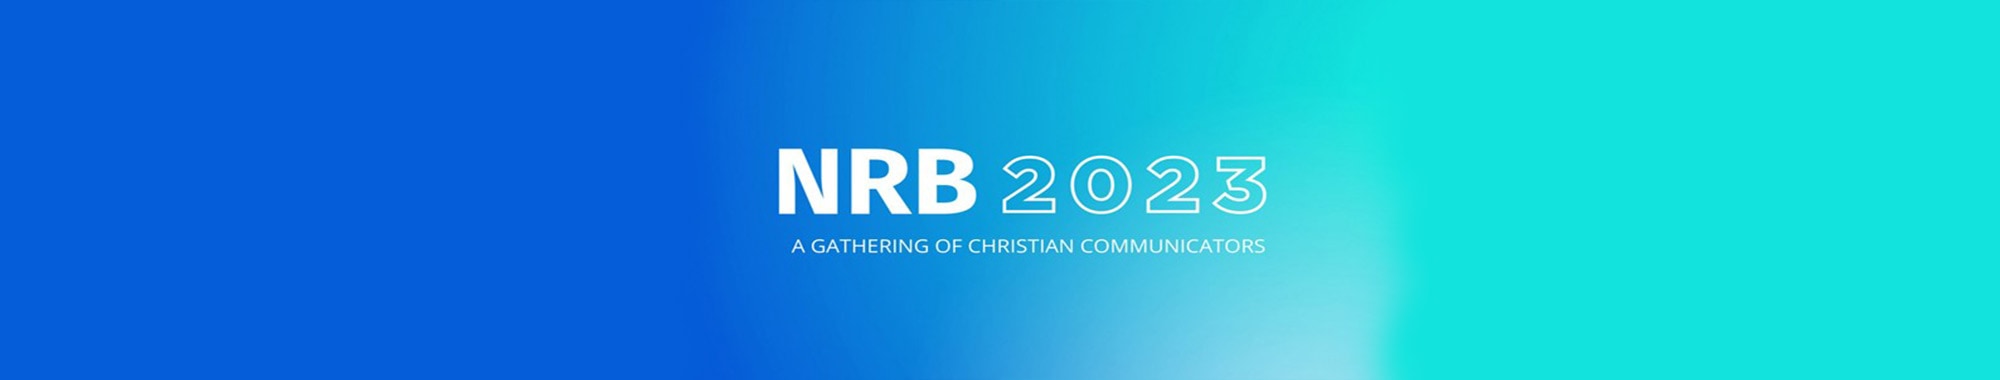 Text on image says NRB 2023 A Gathering of Christian Communicators